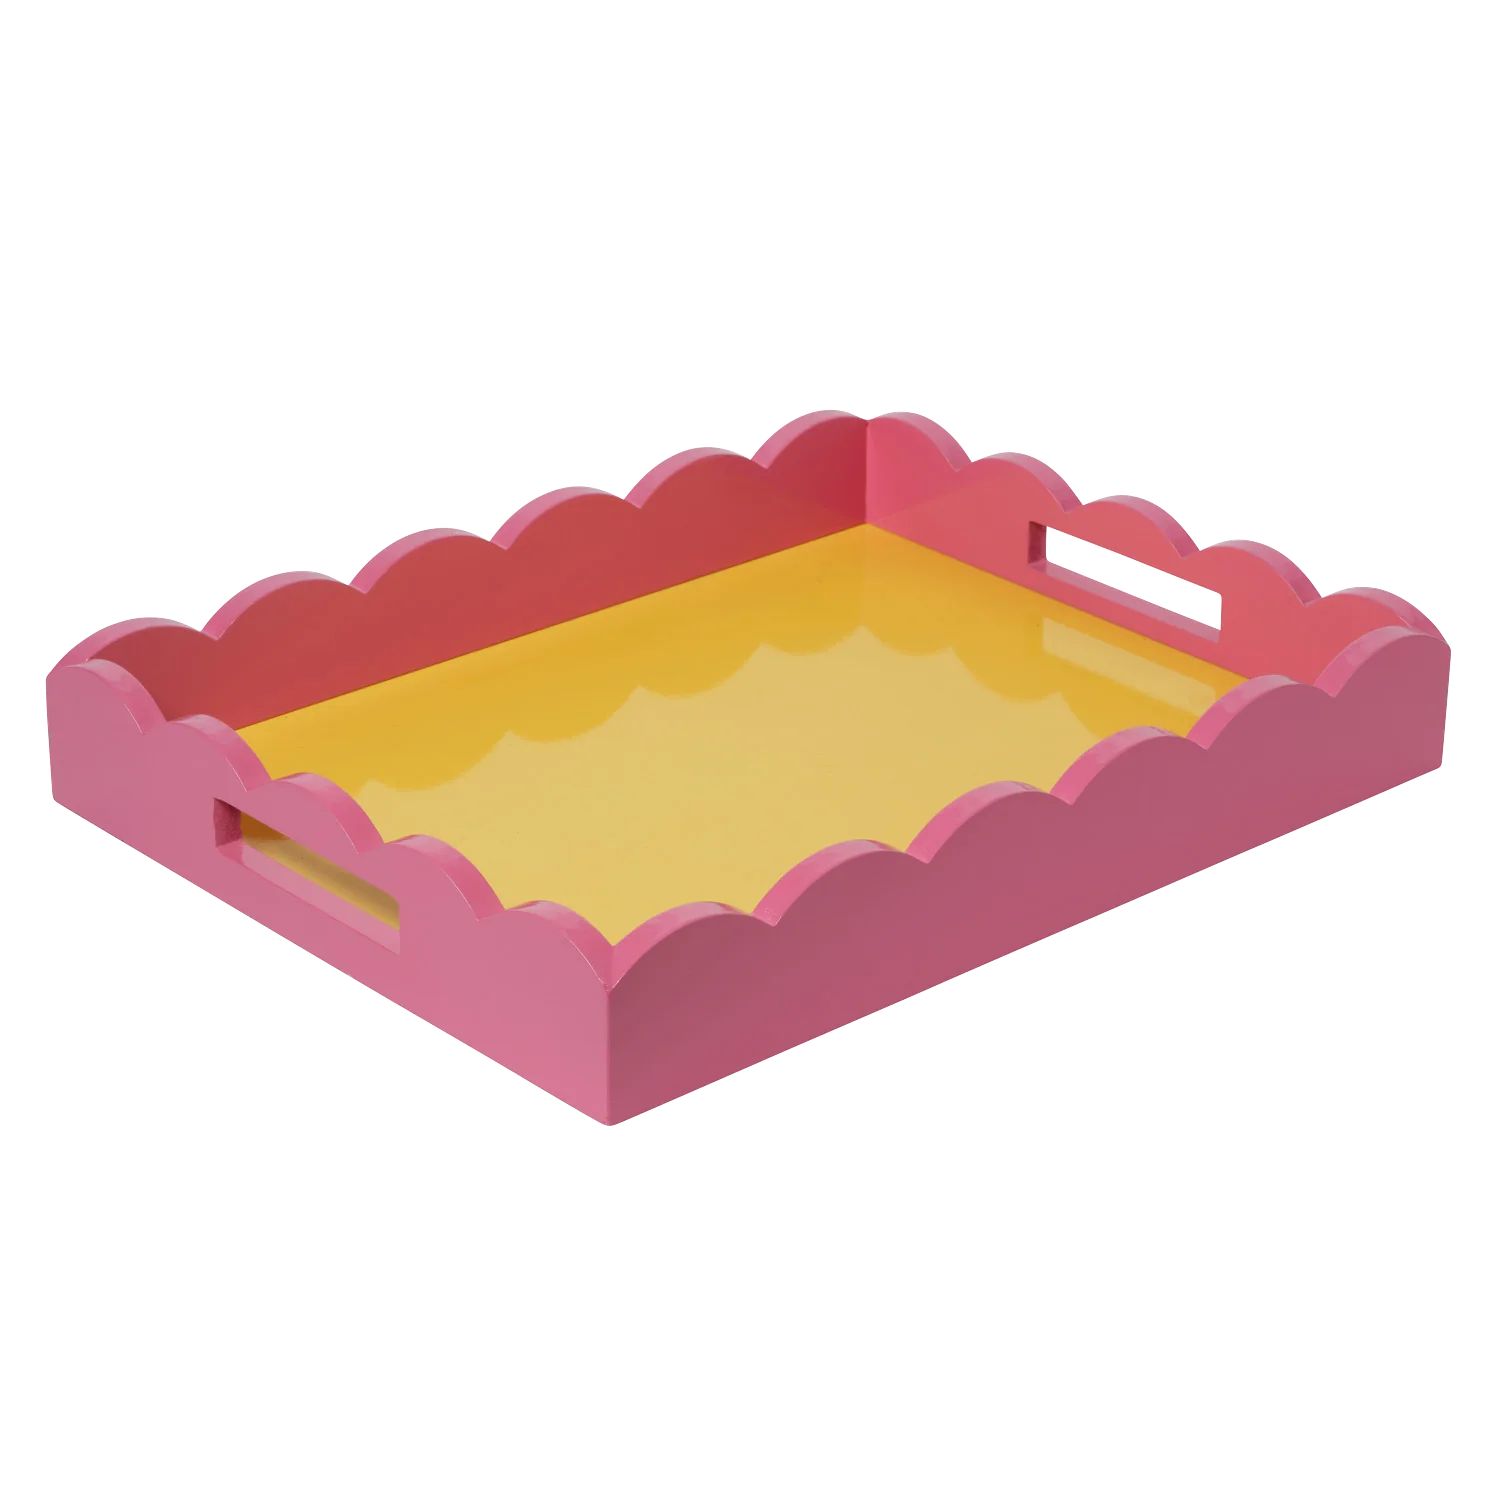 Large Rectangular Yellow and Pink Scalloped Tray | In the Roundhouse